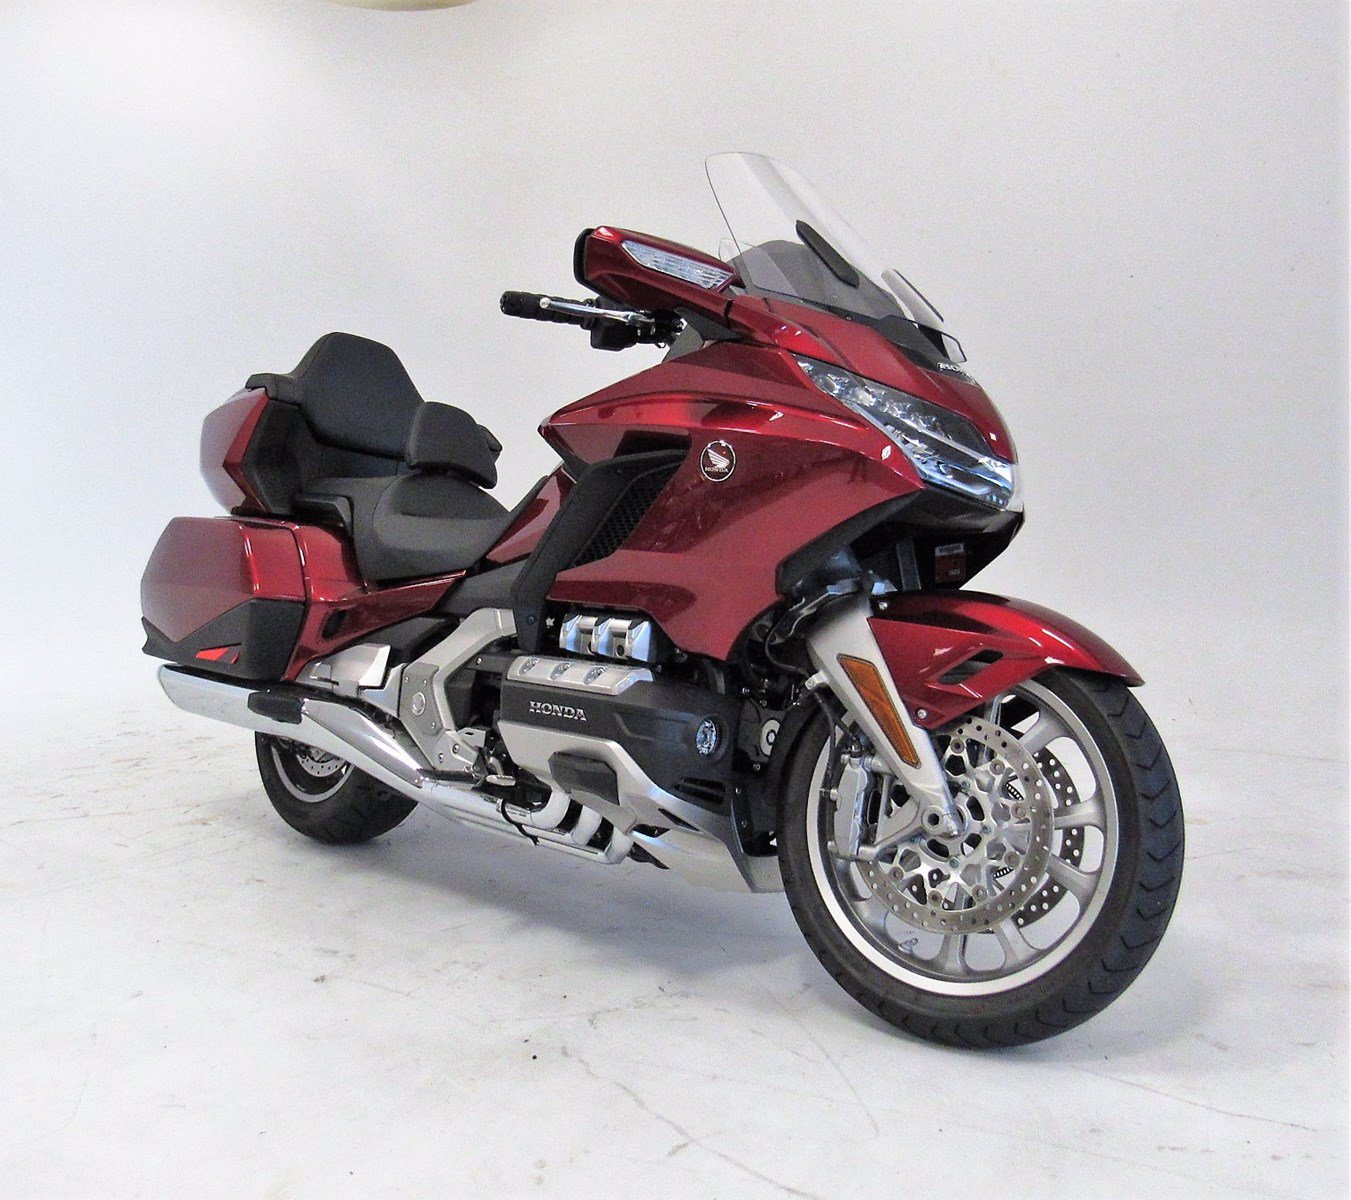 PreOwned 2018 Honda GL1800 Gold Wing Tour Cruiser in